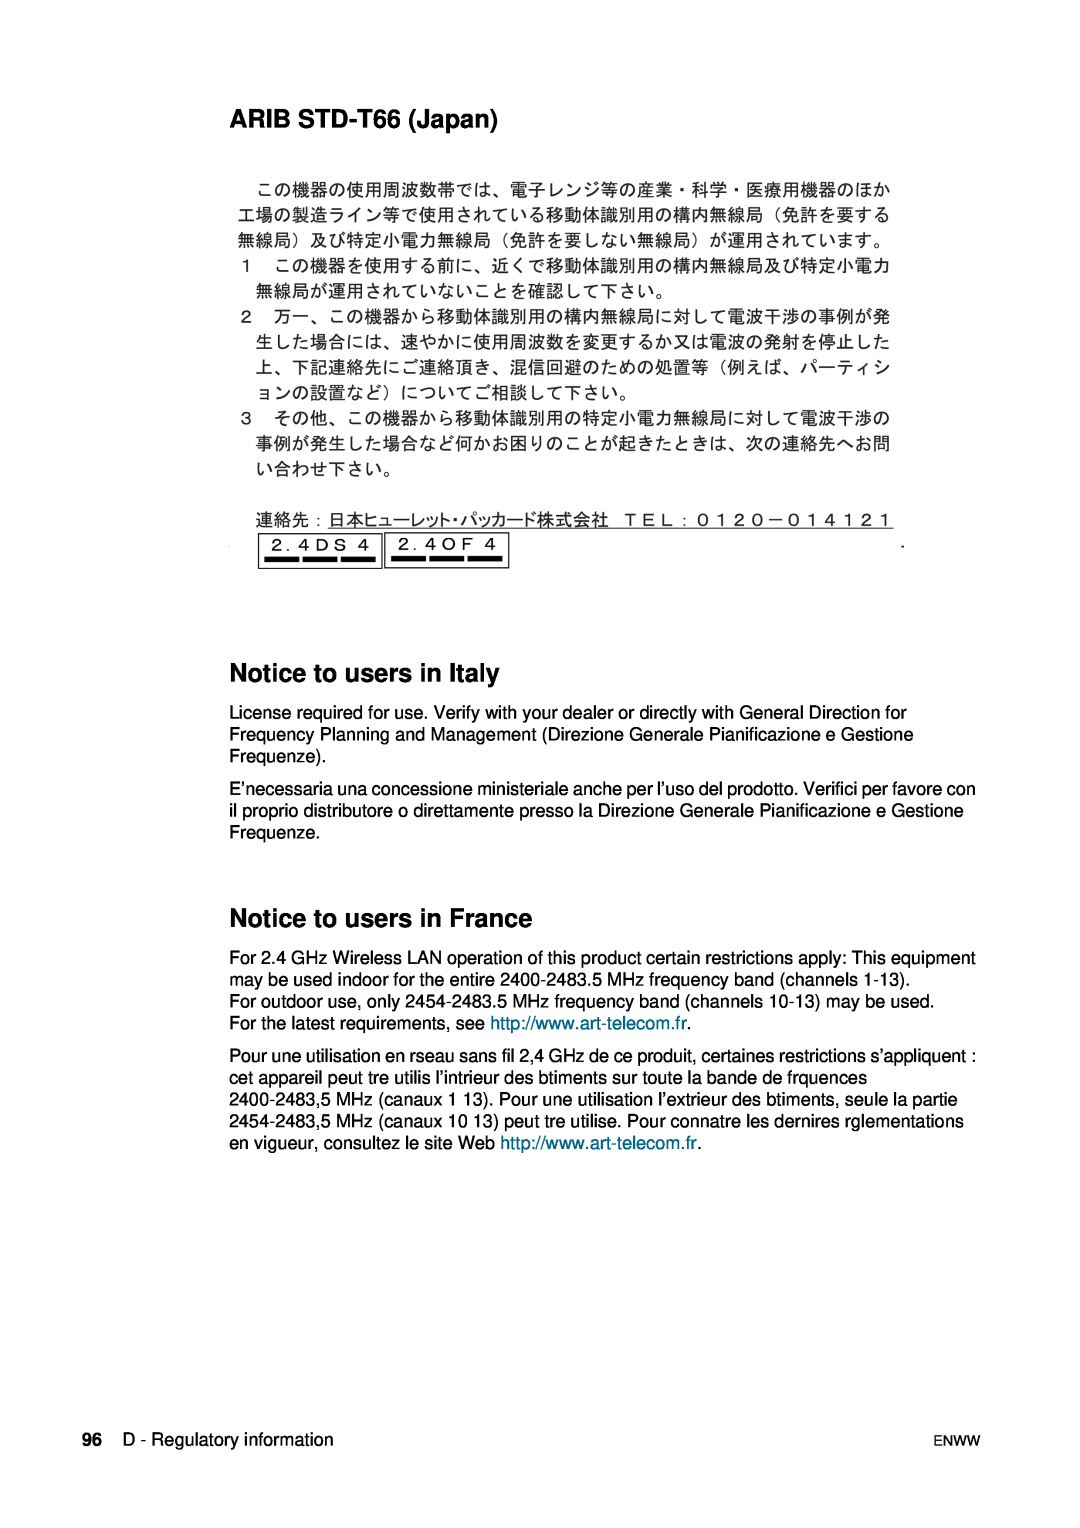 HP 1200 manual ARIB STD-T66 Japan Notice to users in Italy, Notice to users in France 